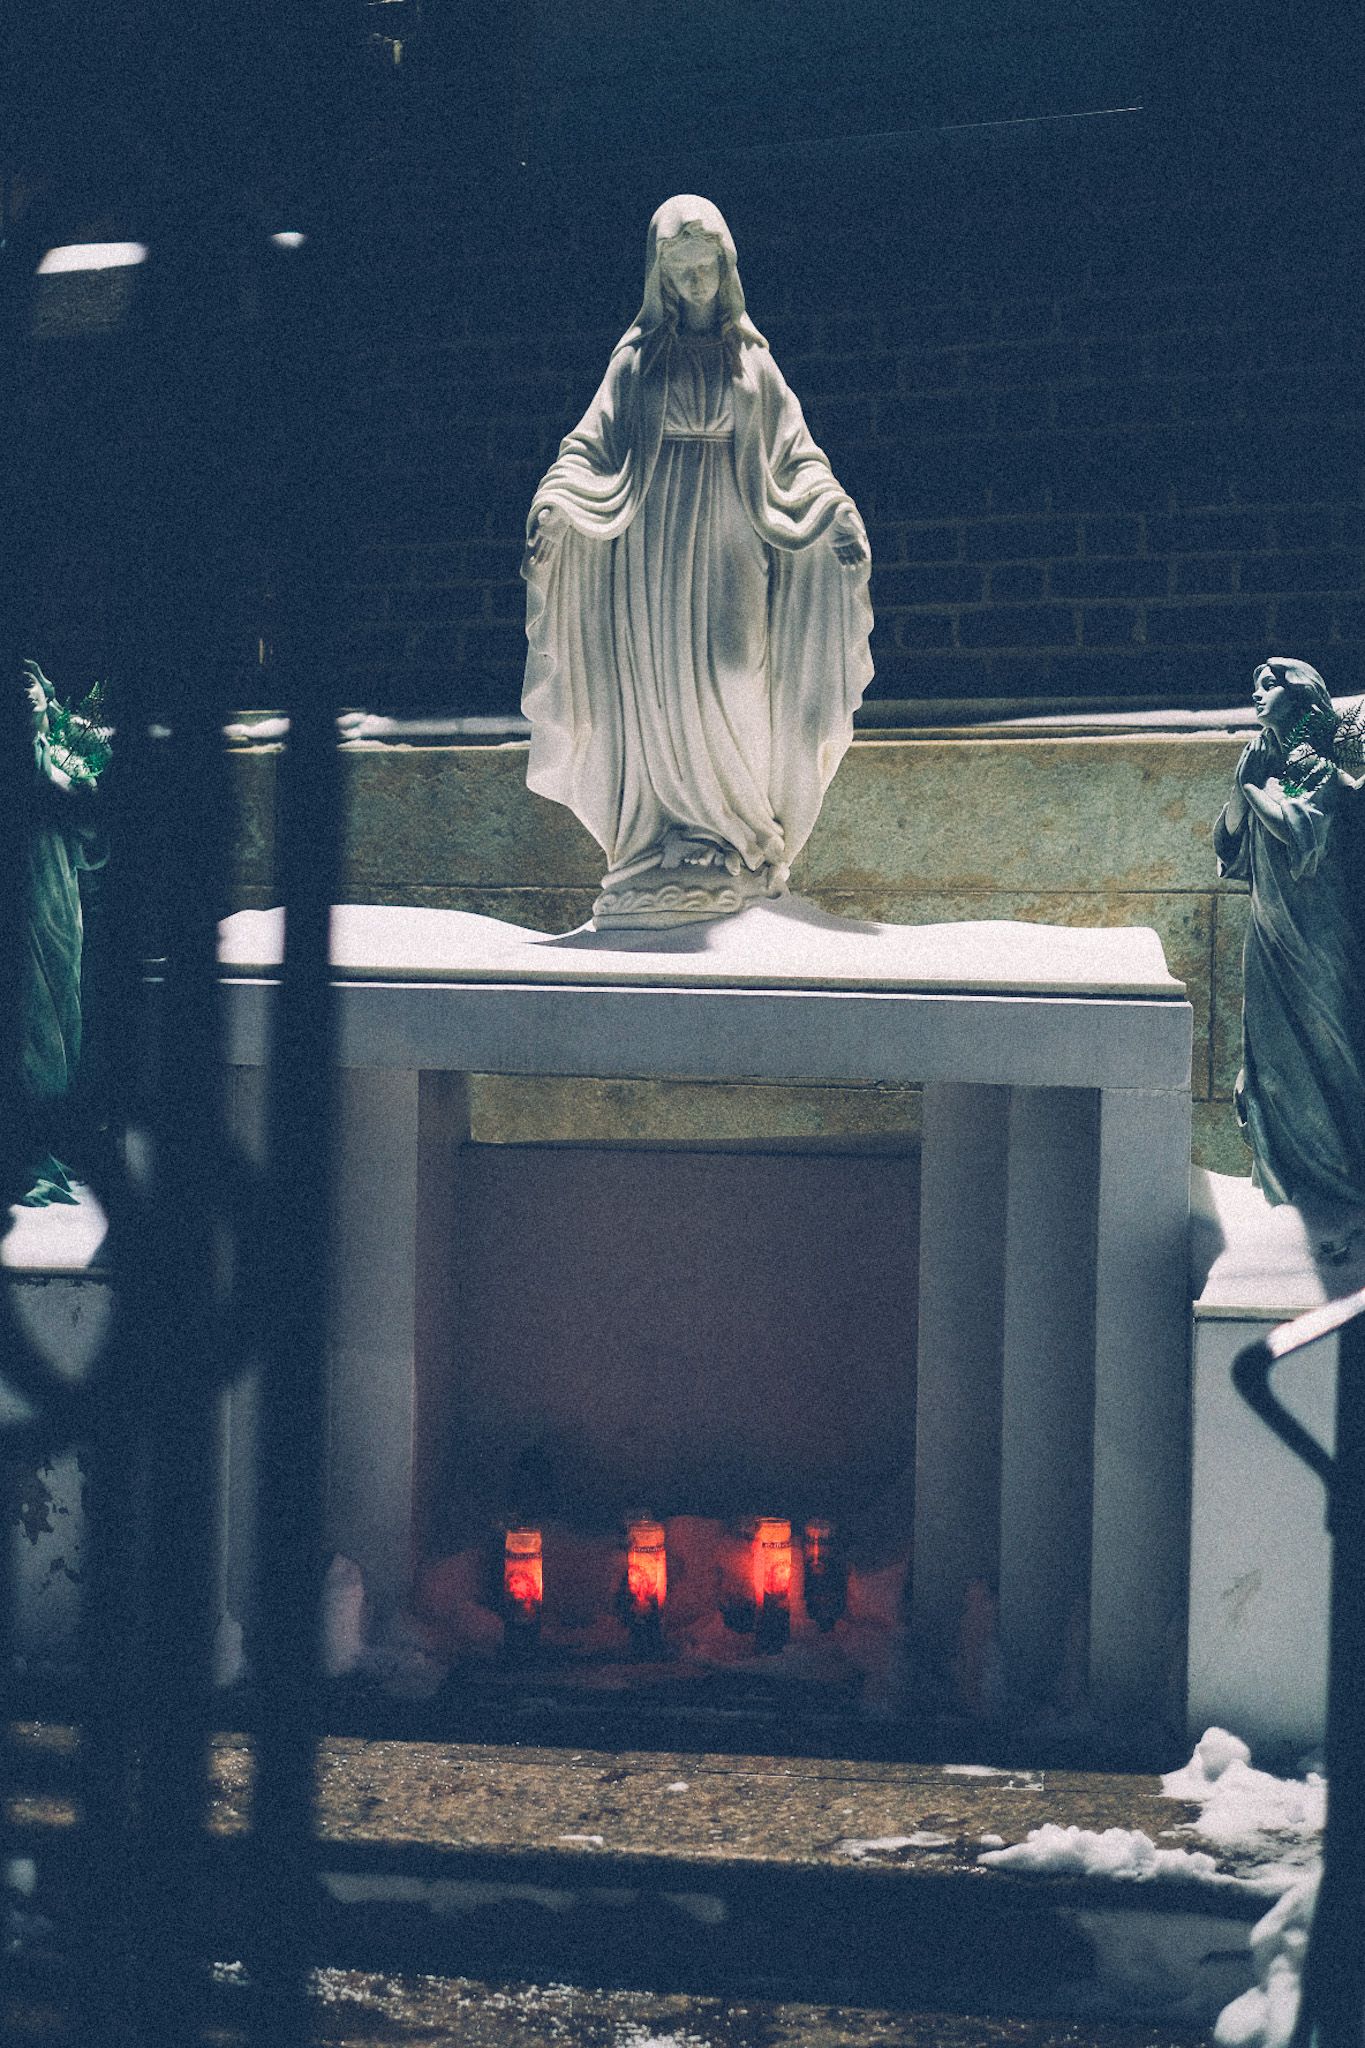 A statue of Mary sits atop a small alter housing red vigil candles, flickering in the evening. Two angels flank her sides under the light outside the brick church.